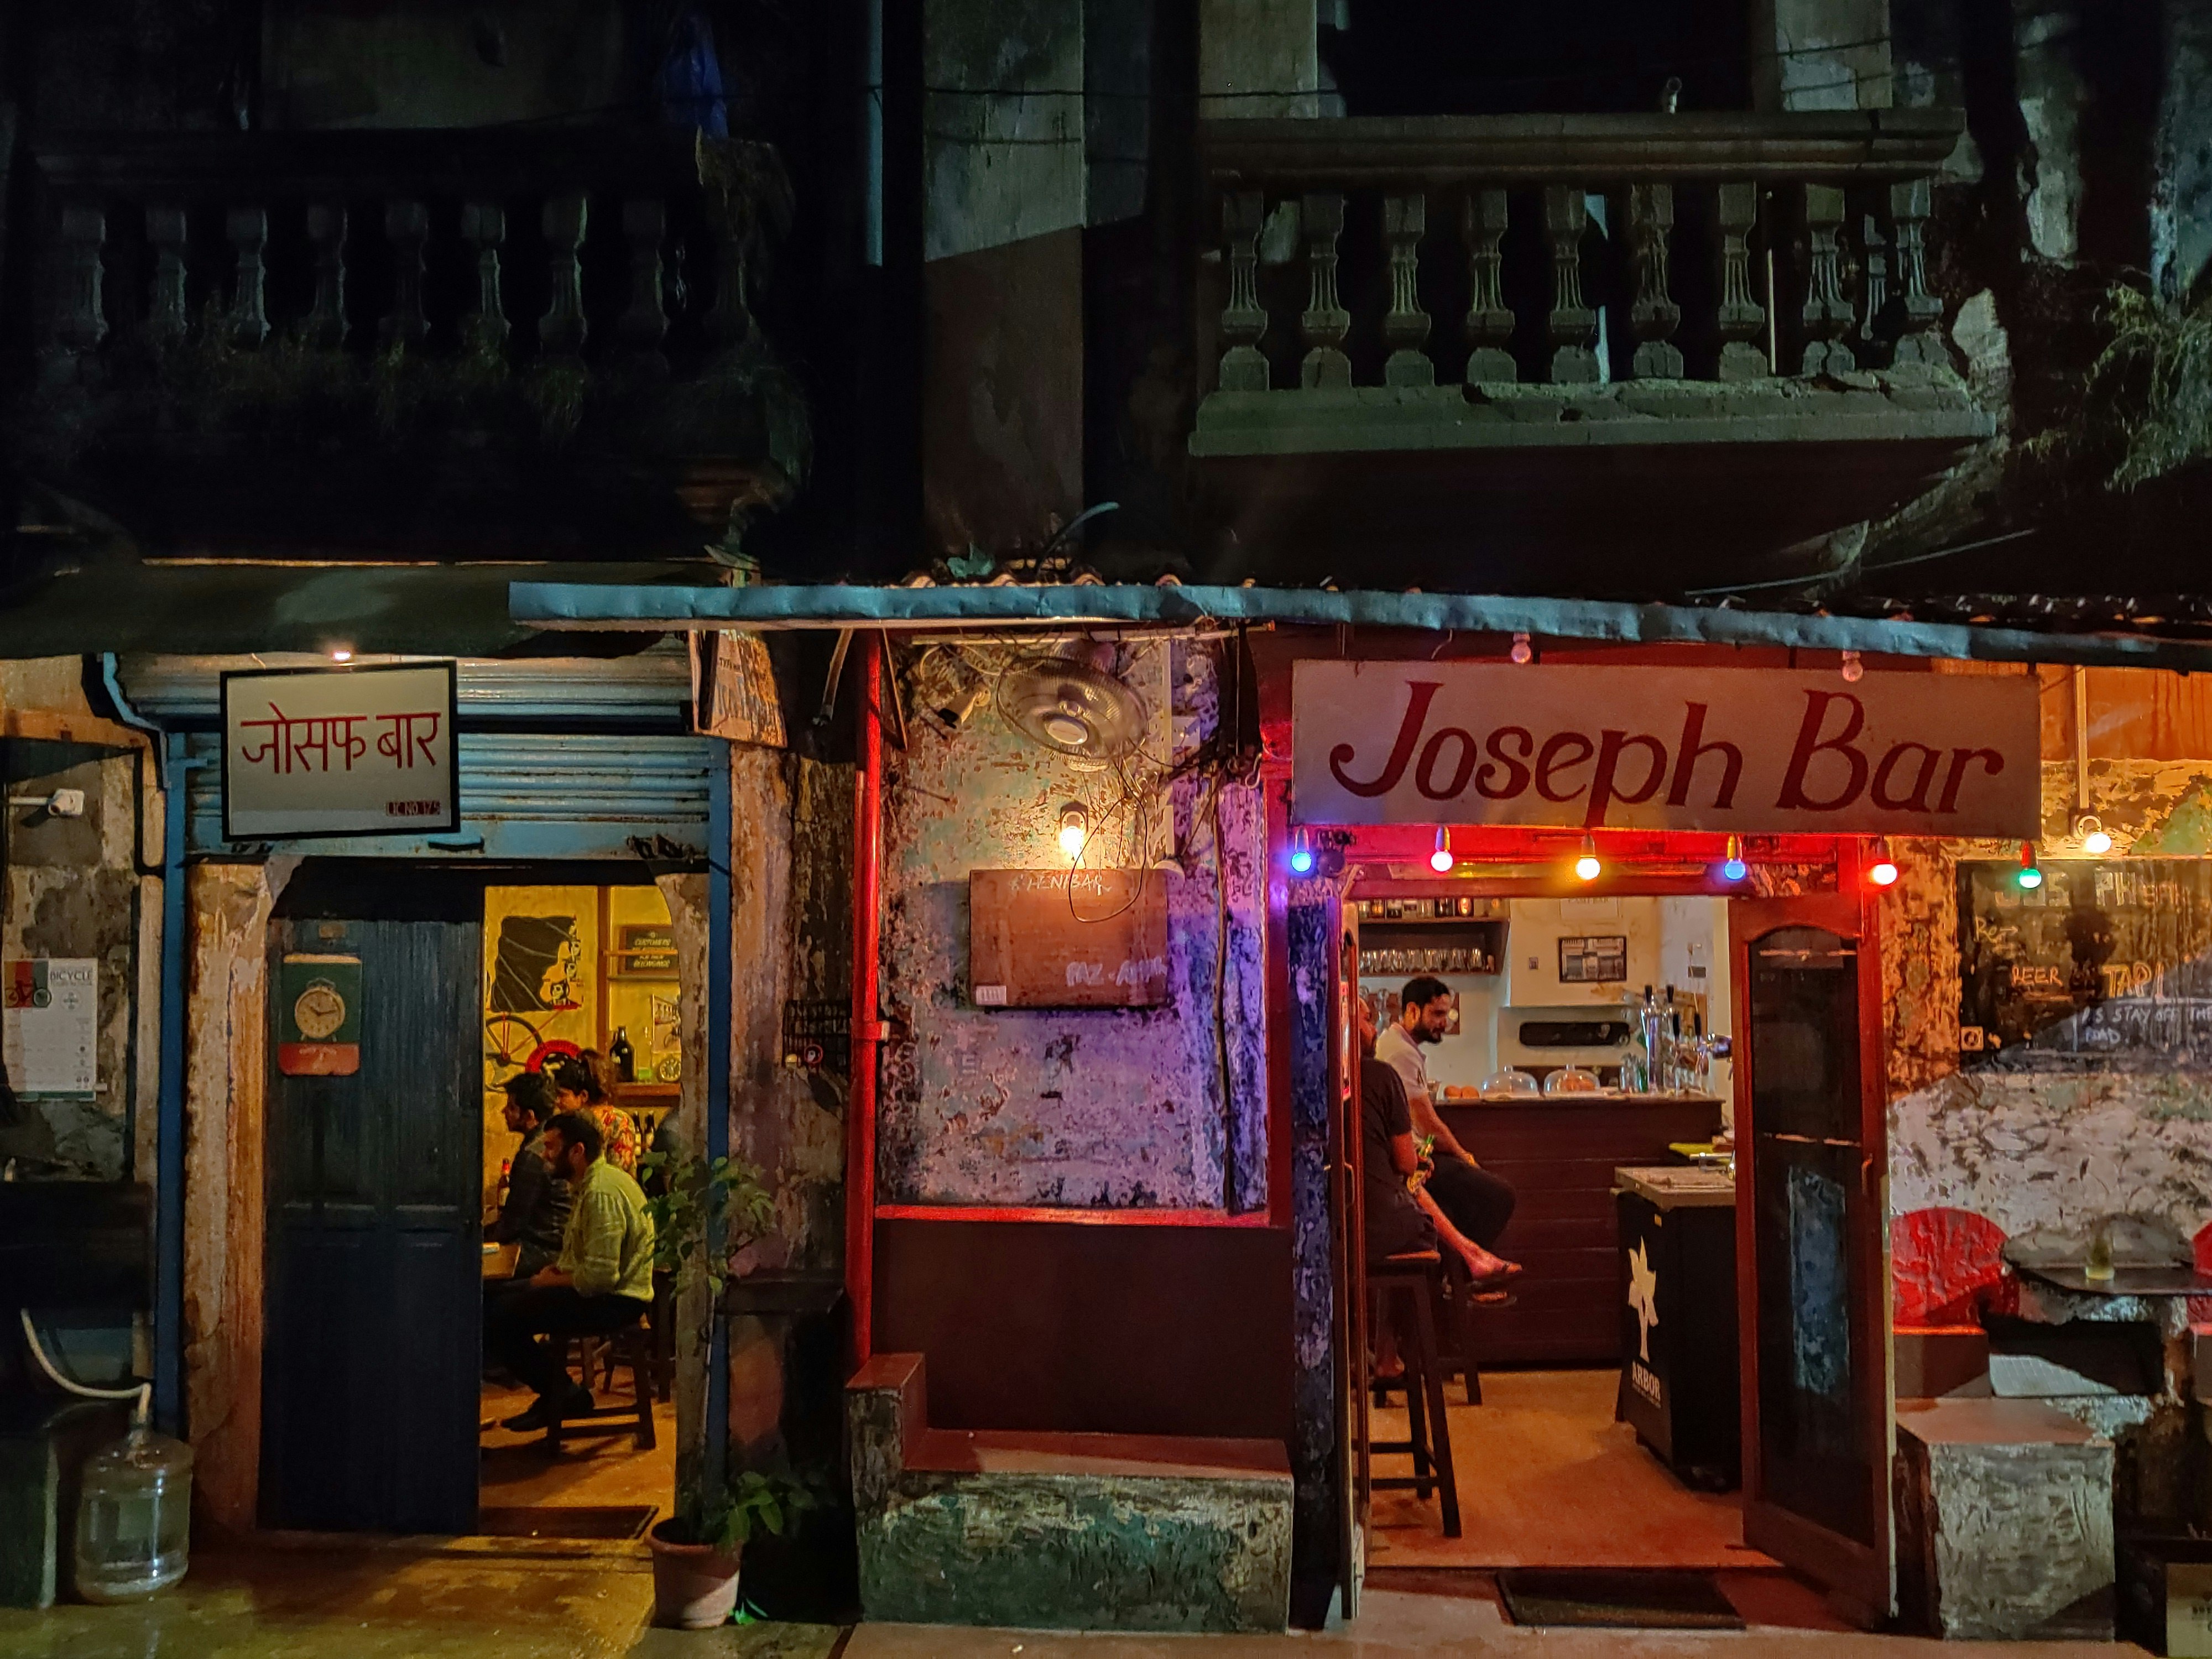 The dimly lit exterior of Joseph Bar in Goa is illuminated by red and purple string lights and the warm light pouring out of the bar itself. The entrance sits under a dark balcony, while inside a few patrons fill the doorways  